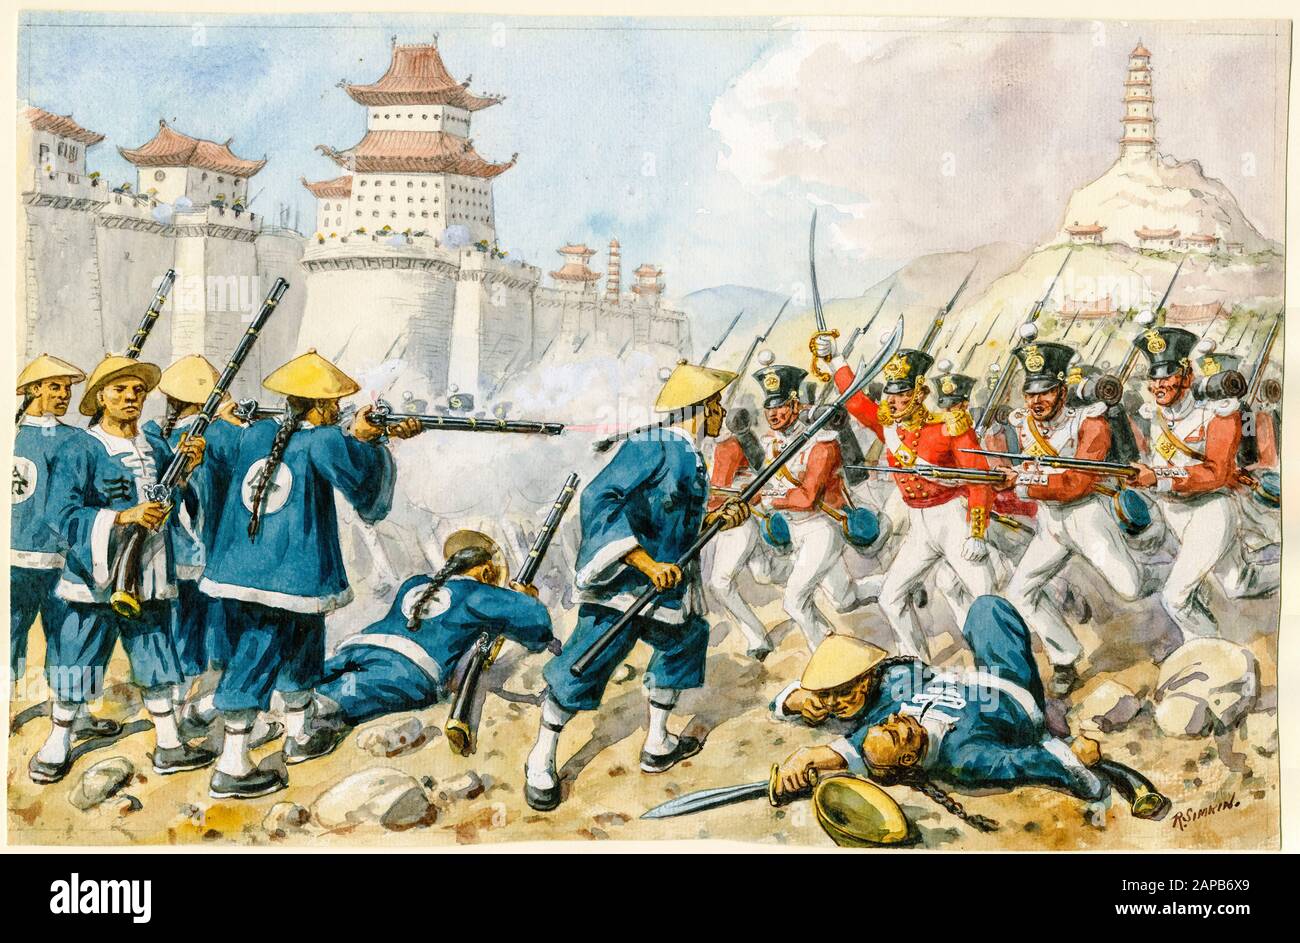 First Opium War, The 98th Regiment of Foot at the Attack on Chin-Kiang-Foo, 21st July 1842, painting by Richard Simkin, unknown date Stock Photo - Alamy